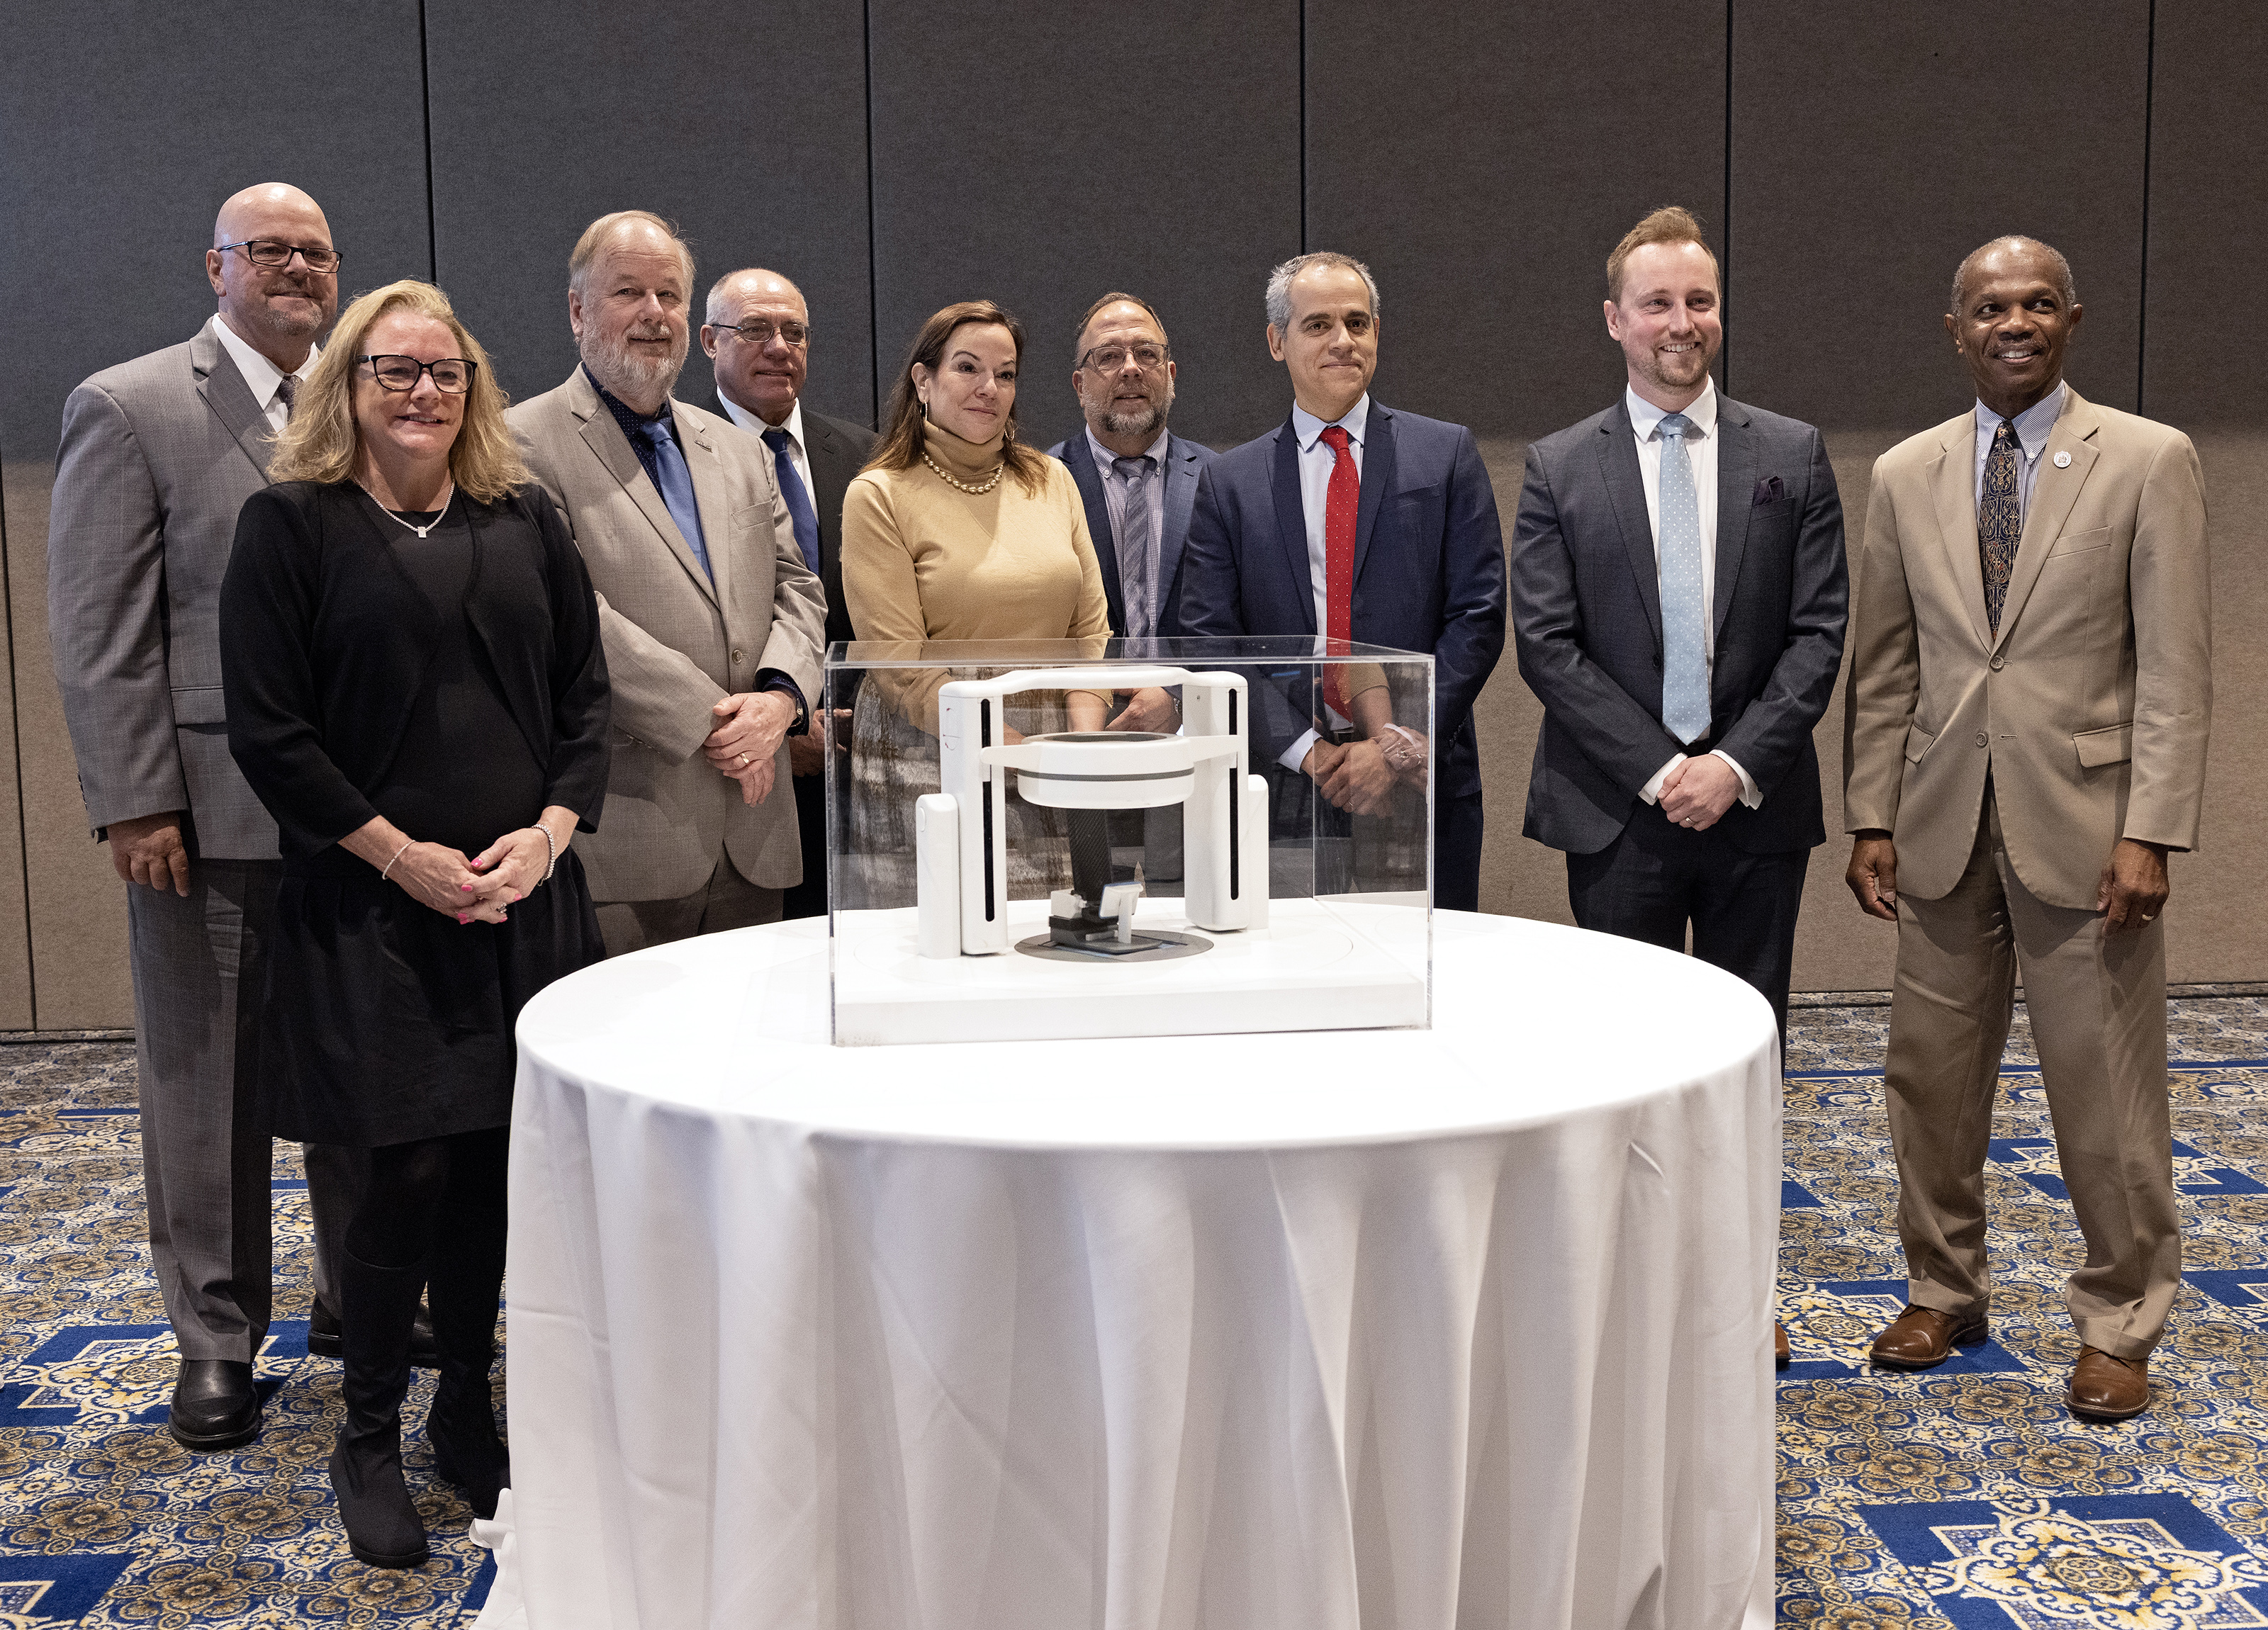 Members of the Hampton University Proton Therapy Institute (HUPTI), Leo Cancer Care, Jefferson Lab, and the City of Hampton pose for a photograph next to the upright radiation therapy prototype during a press announcement held at Hampton University